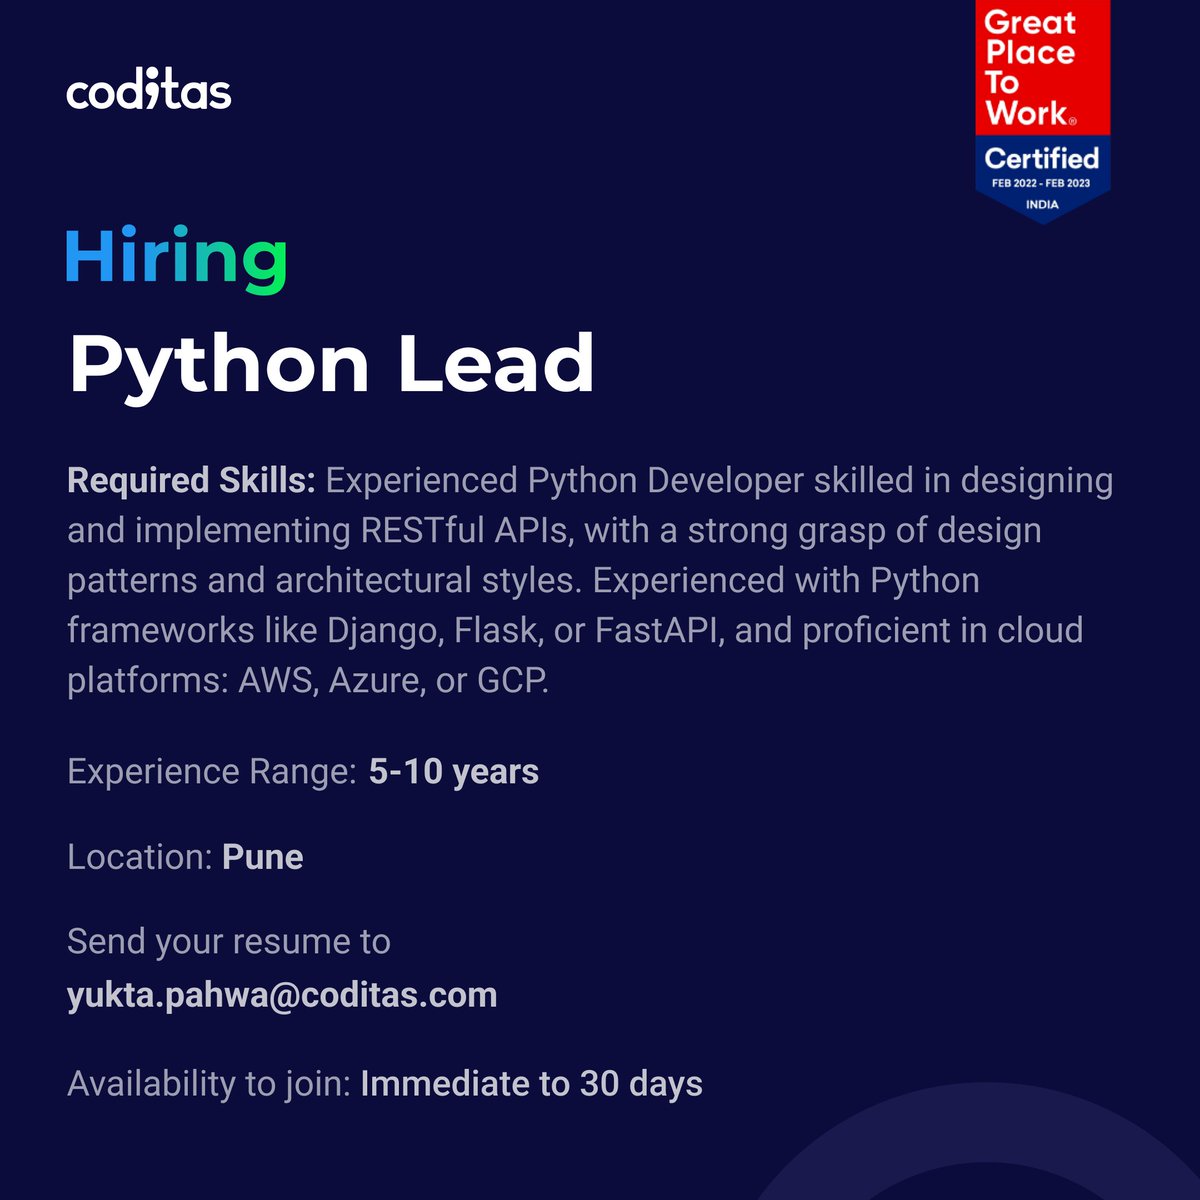 #HiringNow: Python Lead role at Coditas! Spearhead scalable solutions, design RESTful APIs, and lead a team of developers. 5+ yrs exp. required.

Apply here: coditas.com/careers/job-ap…
Or send your CV to yukta.pahwa@coditas.com. 

#PythonJobs #TechCareers #PuneITJobs #CoditasCareers